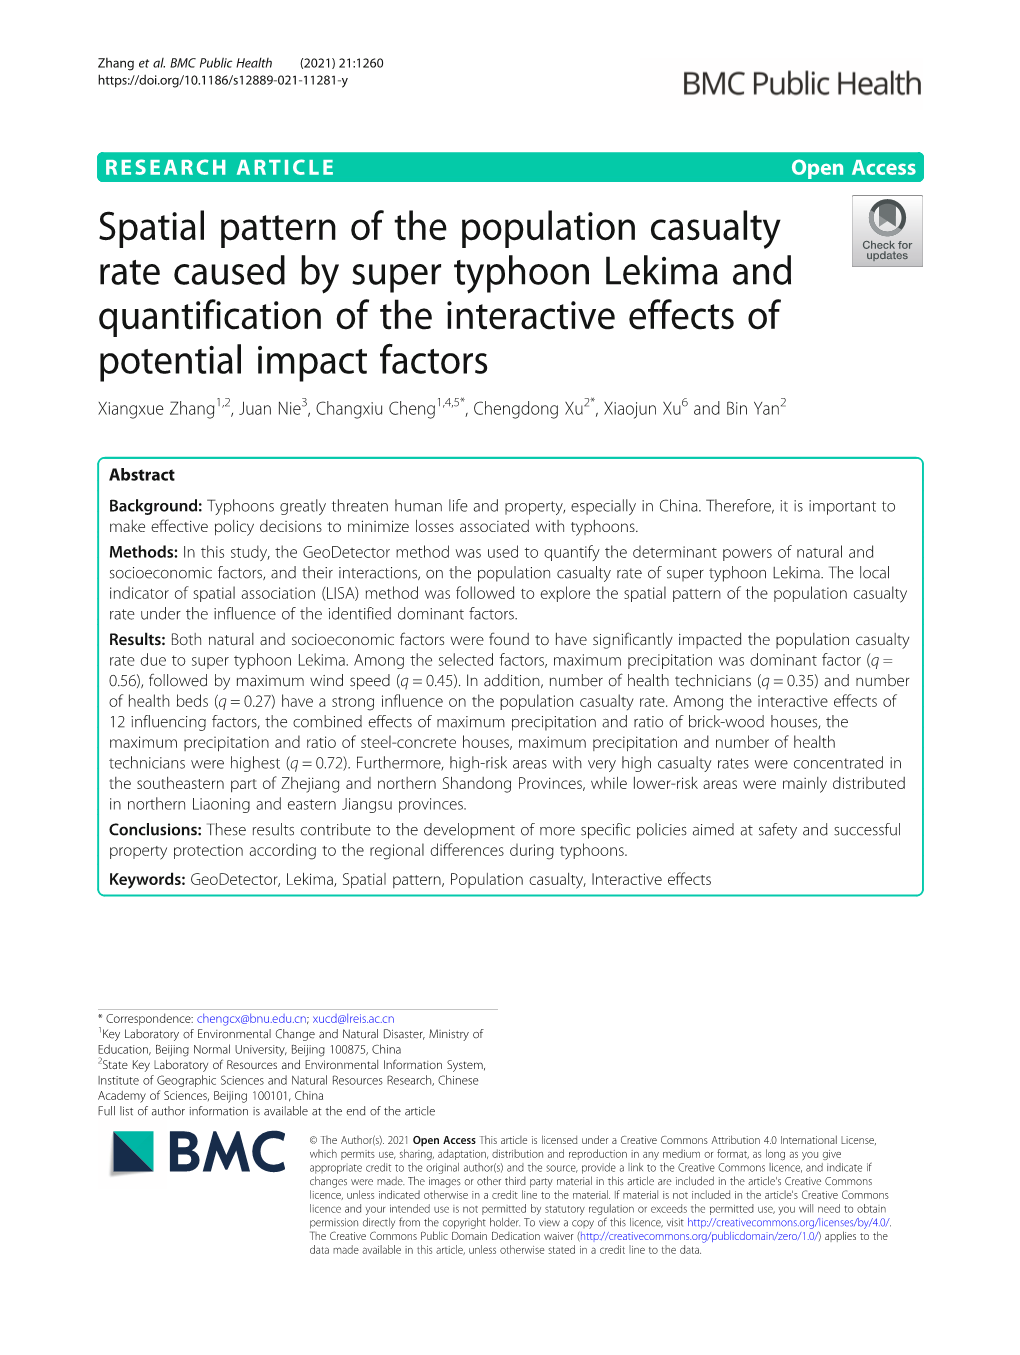 Spatial Pattern of the Population Casualty Rate Caused by Super